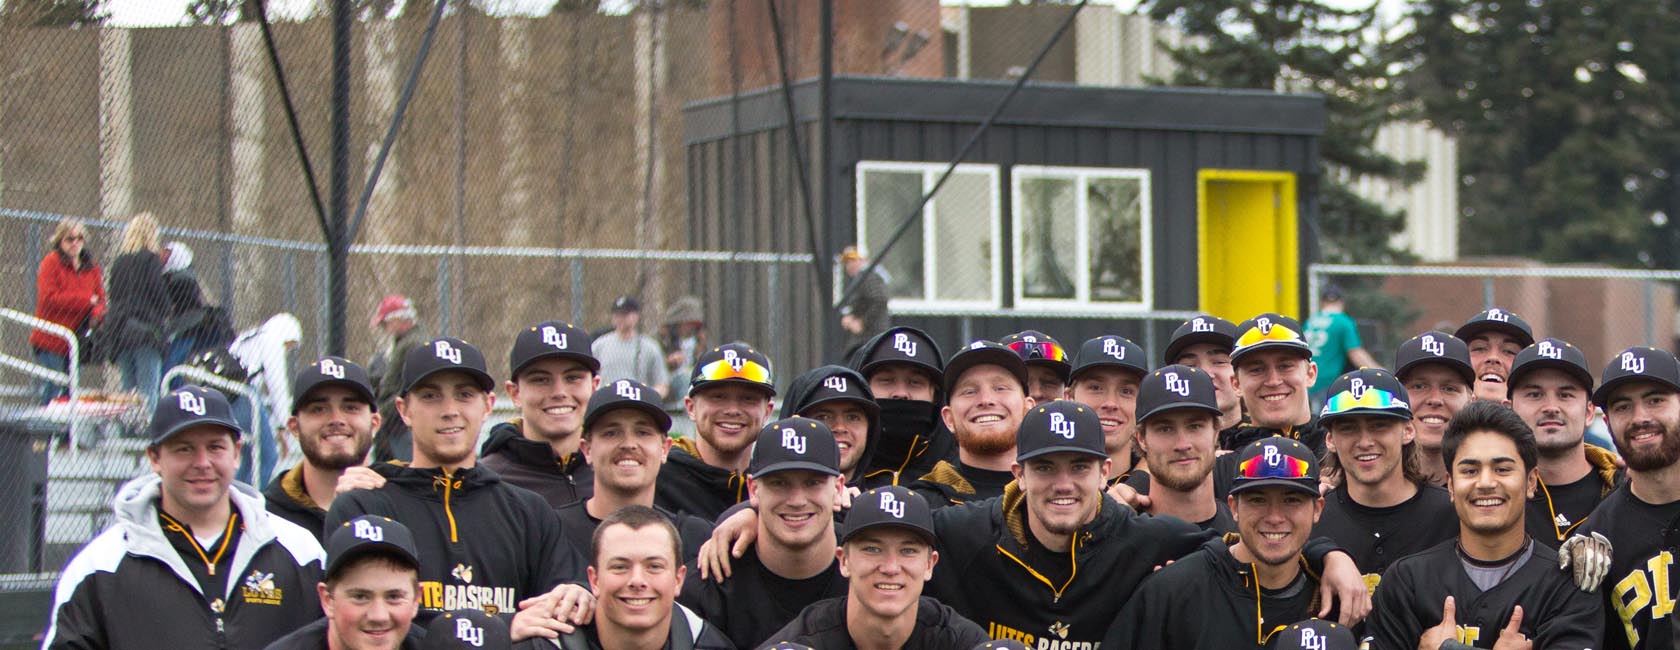 Tuesday, March 31, 2015. PLU baseball won 6-1 to mark the 125th win for the year for Lute athletic teams in the Drive to 125.(Photo: John Froschauer/PLU)